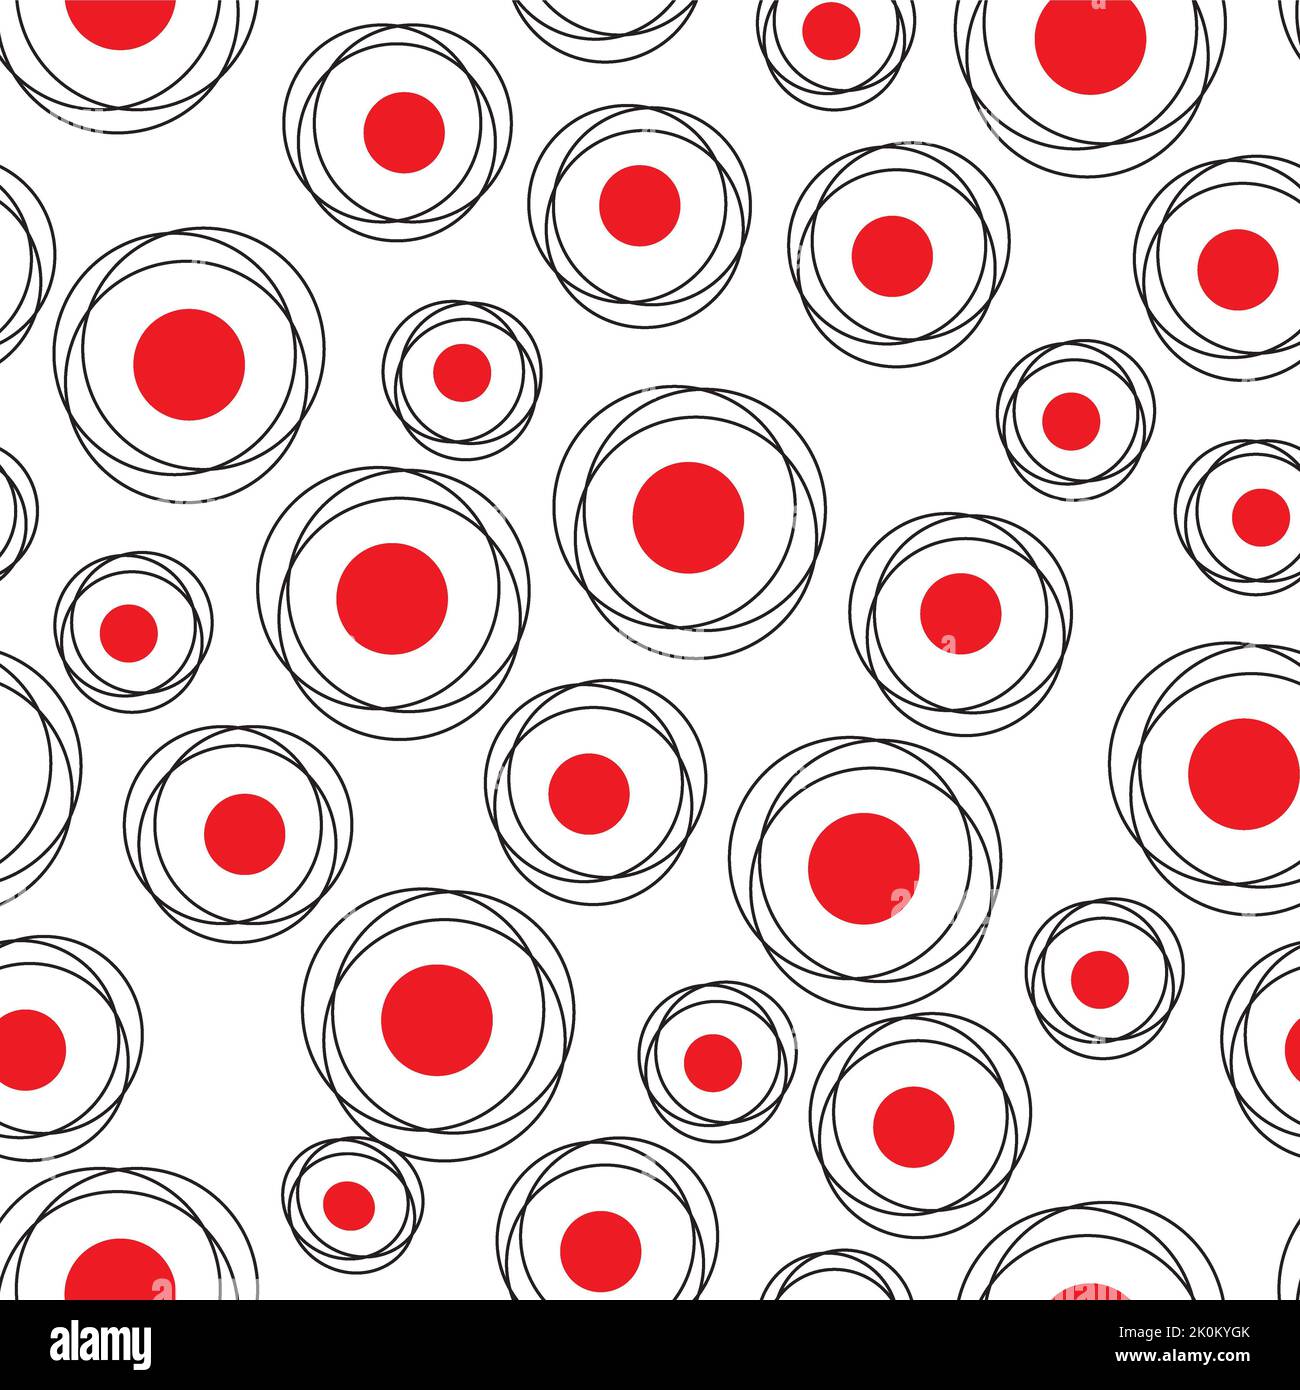 The red dots in black circles on a white background - great for wallpapers or backgrounds Stock Photo